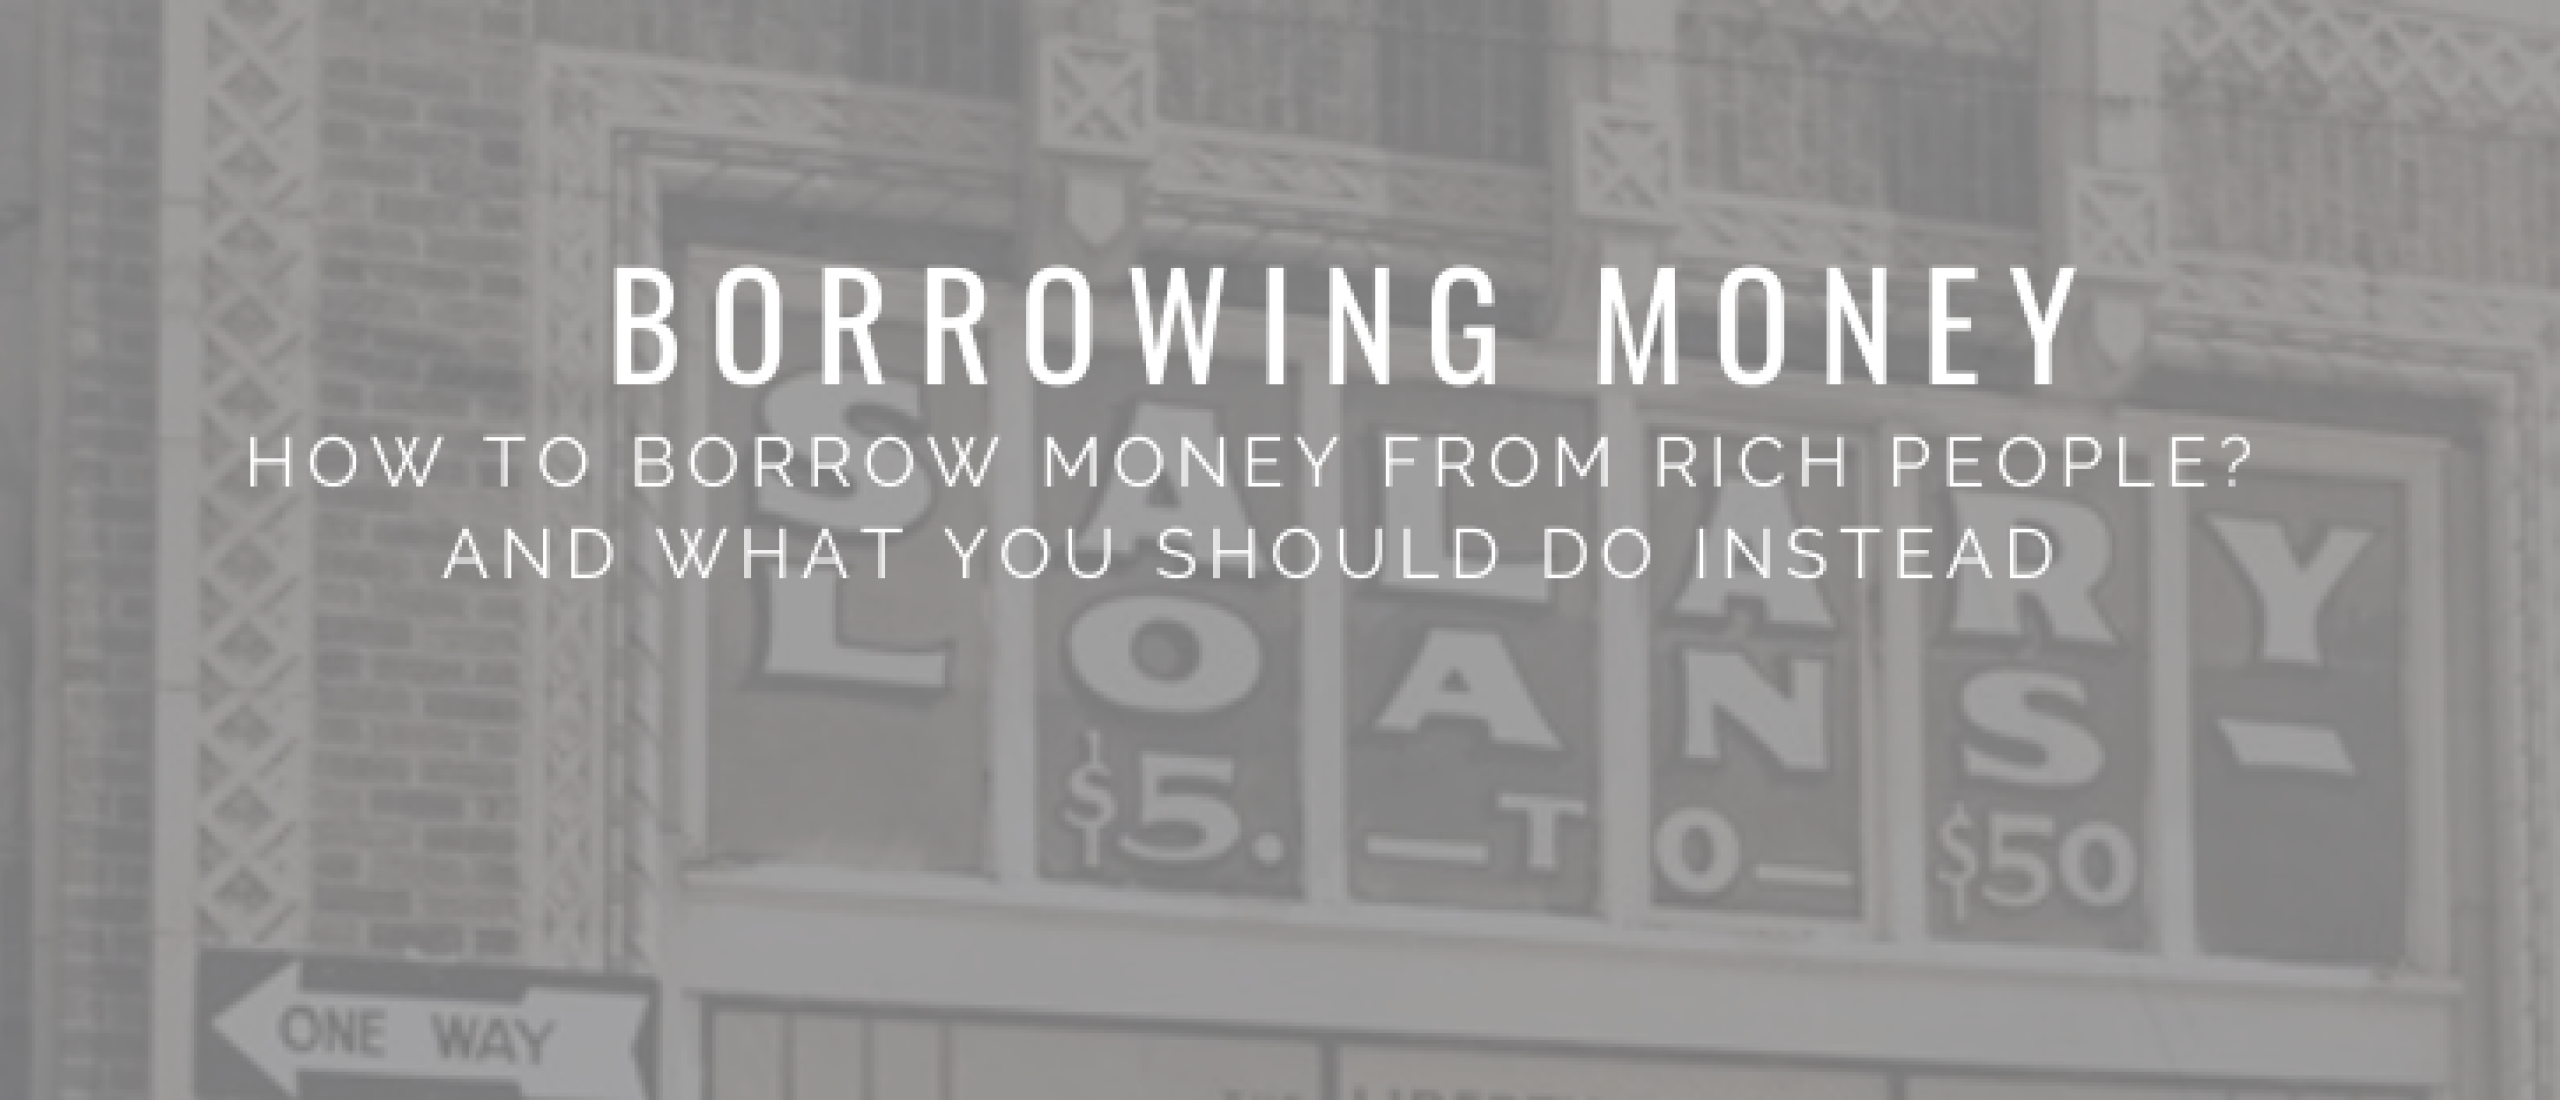 Borrowing Money From Rich People | Happy Investors